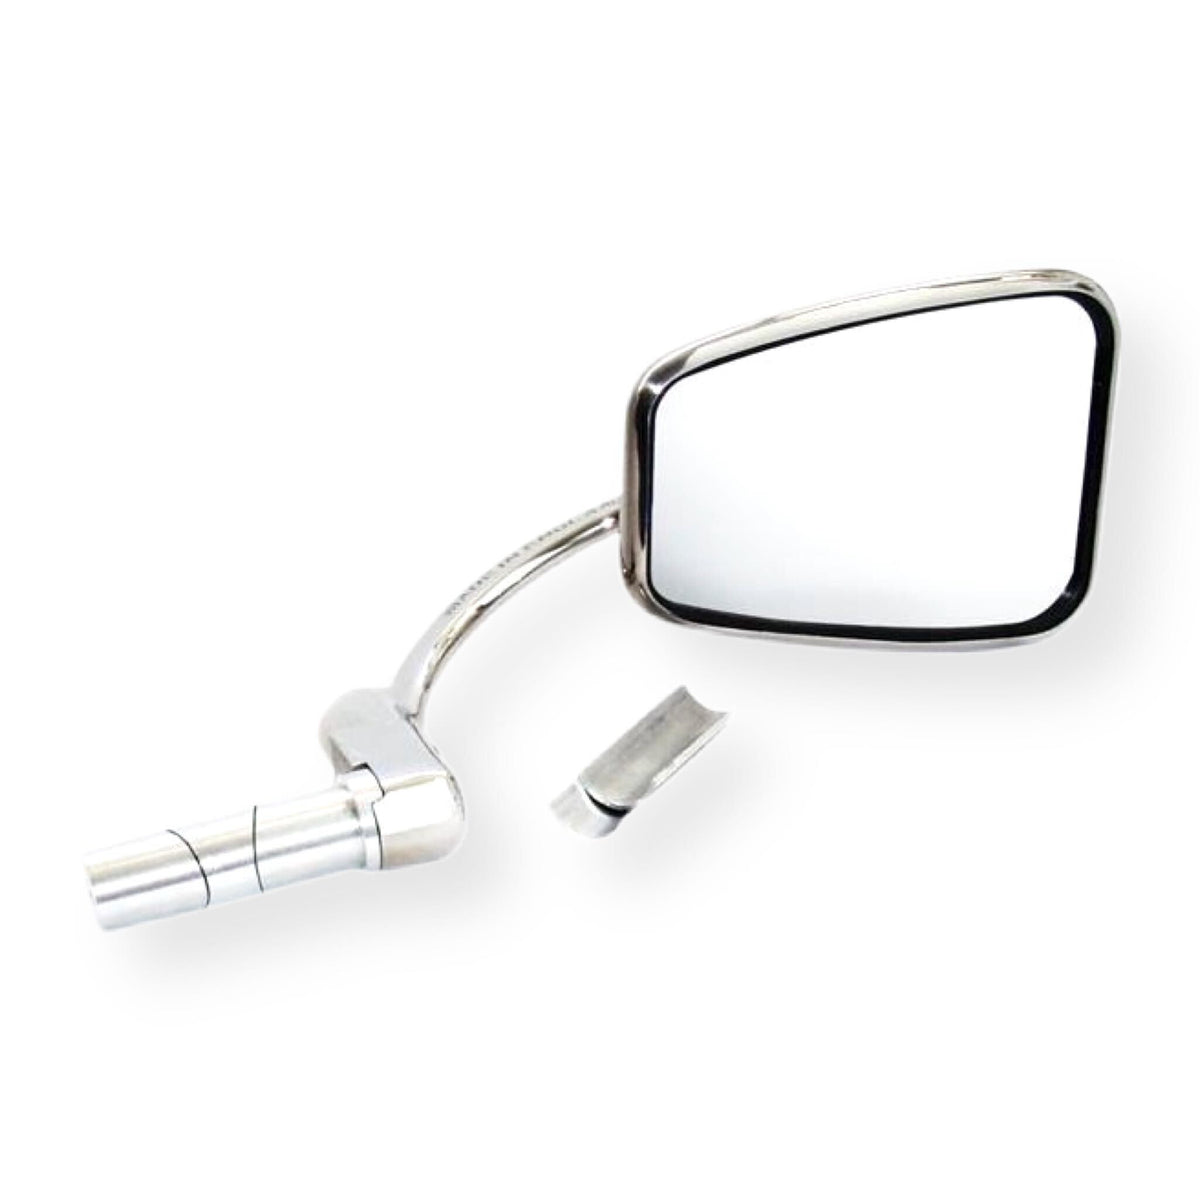 Motorcycle Scooter Bar End Mirror - Stainless Steel